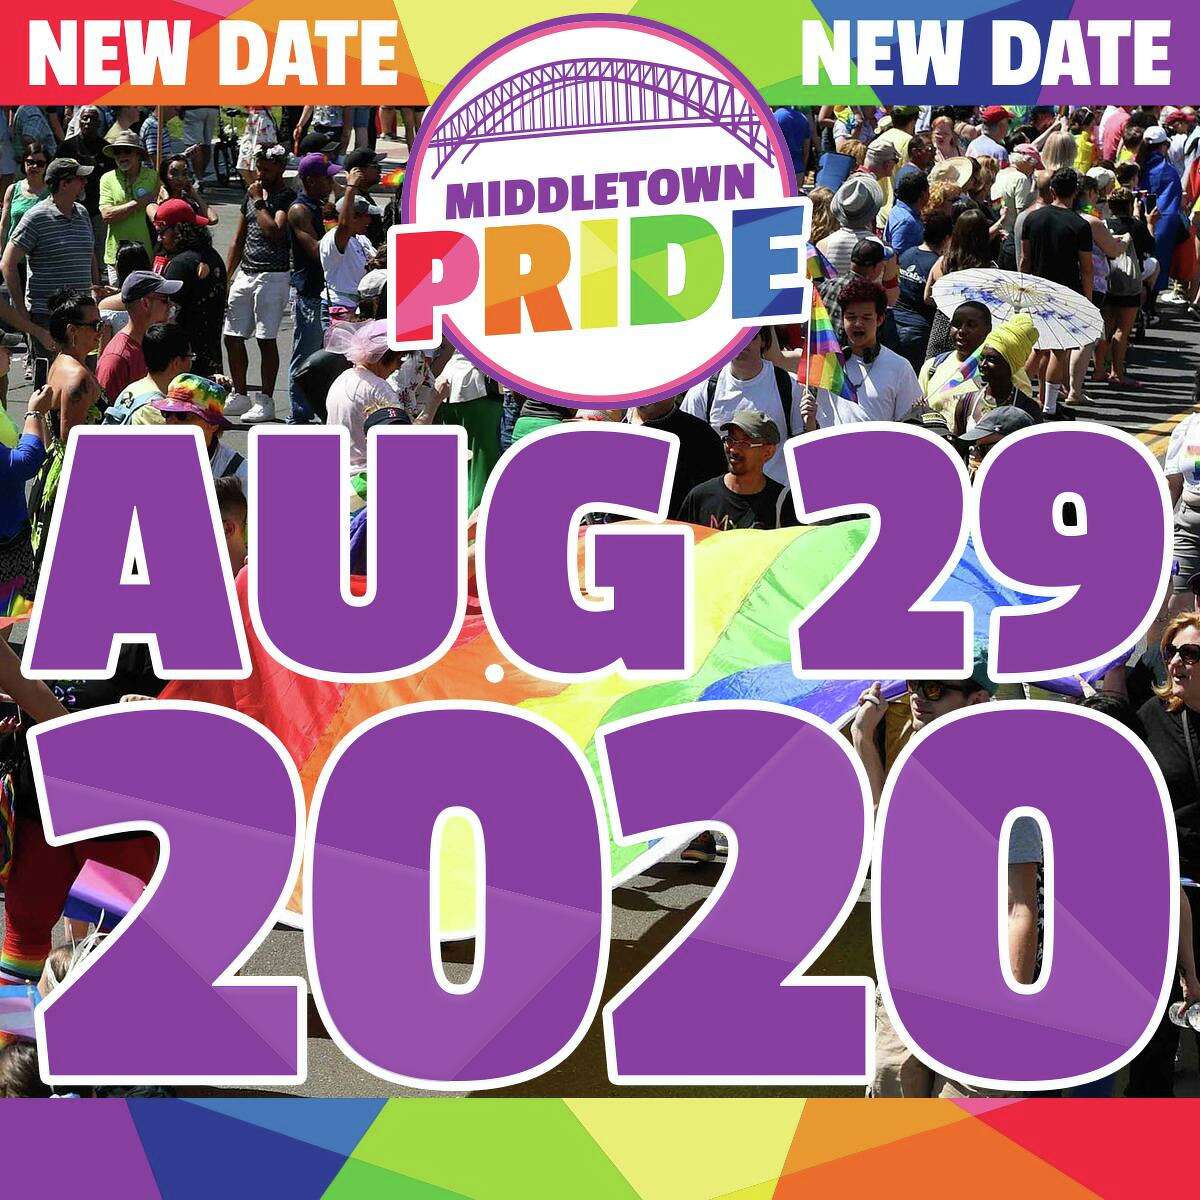 Middletown Pride has been rescheduled from June 20 to Aug. 20 due to coronavirus concerns.